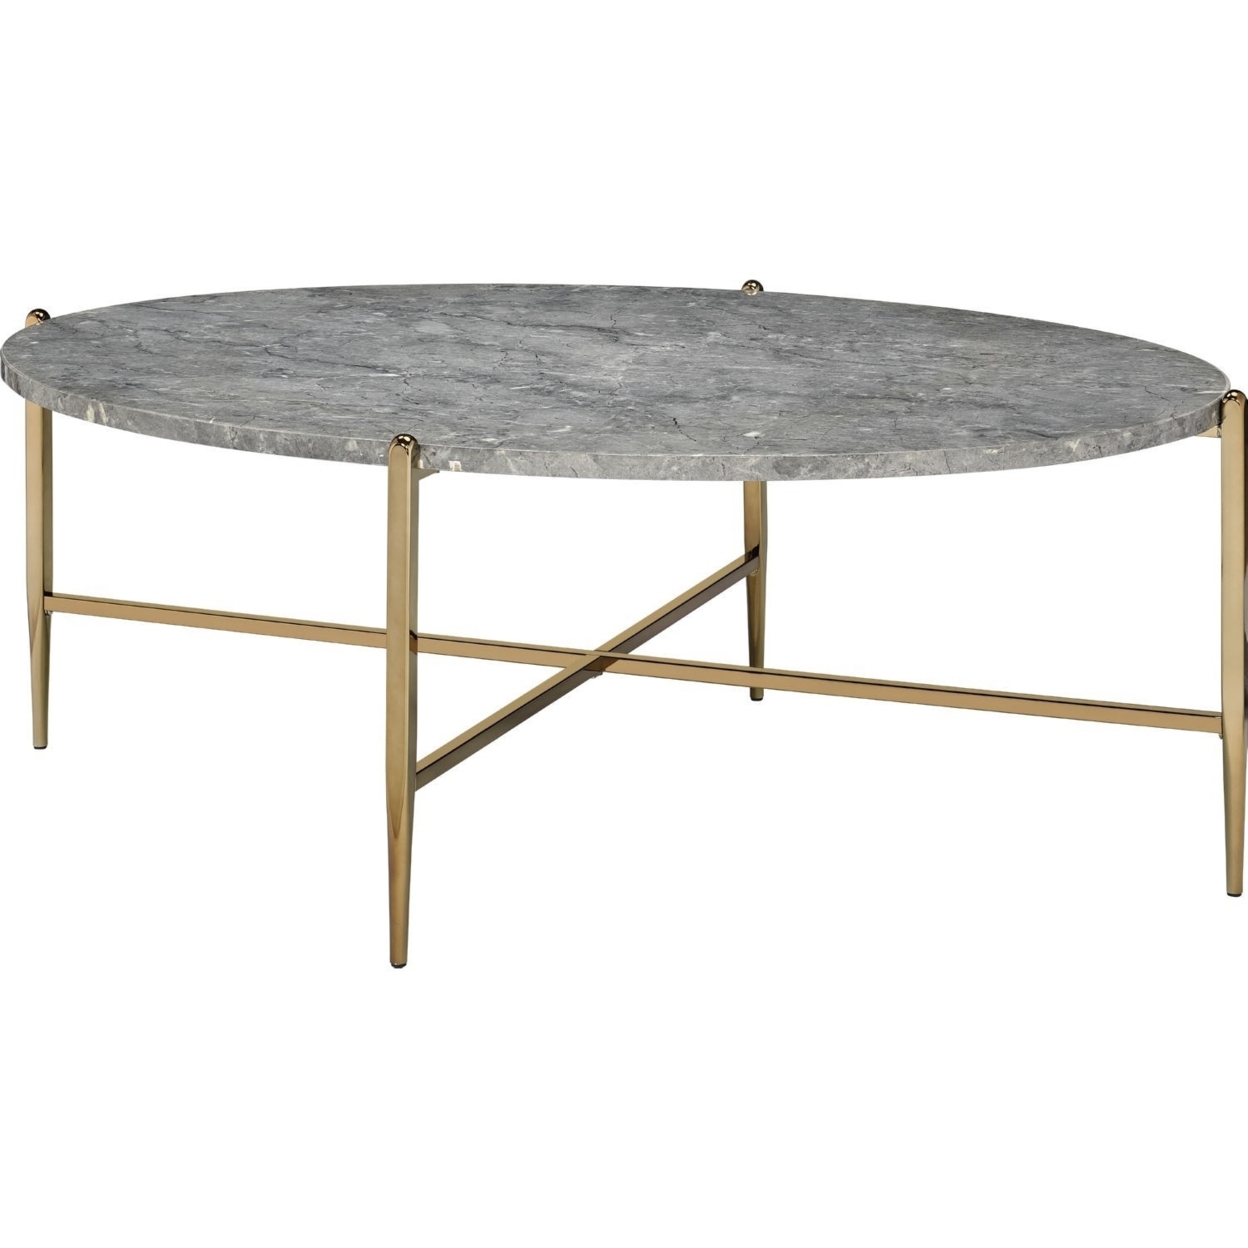 Coffee Table With Oval Marble Top And X Shaped Support, Gray And Gold- Saltoro Sherpi